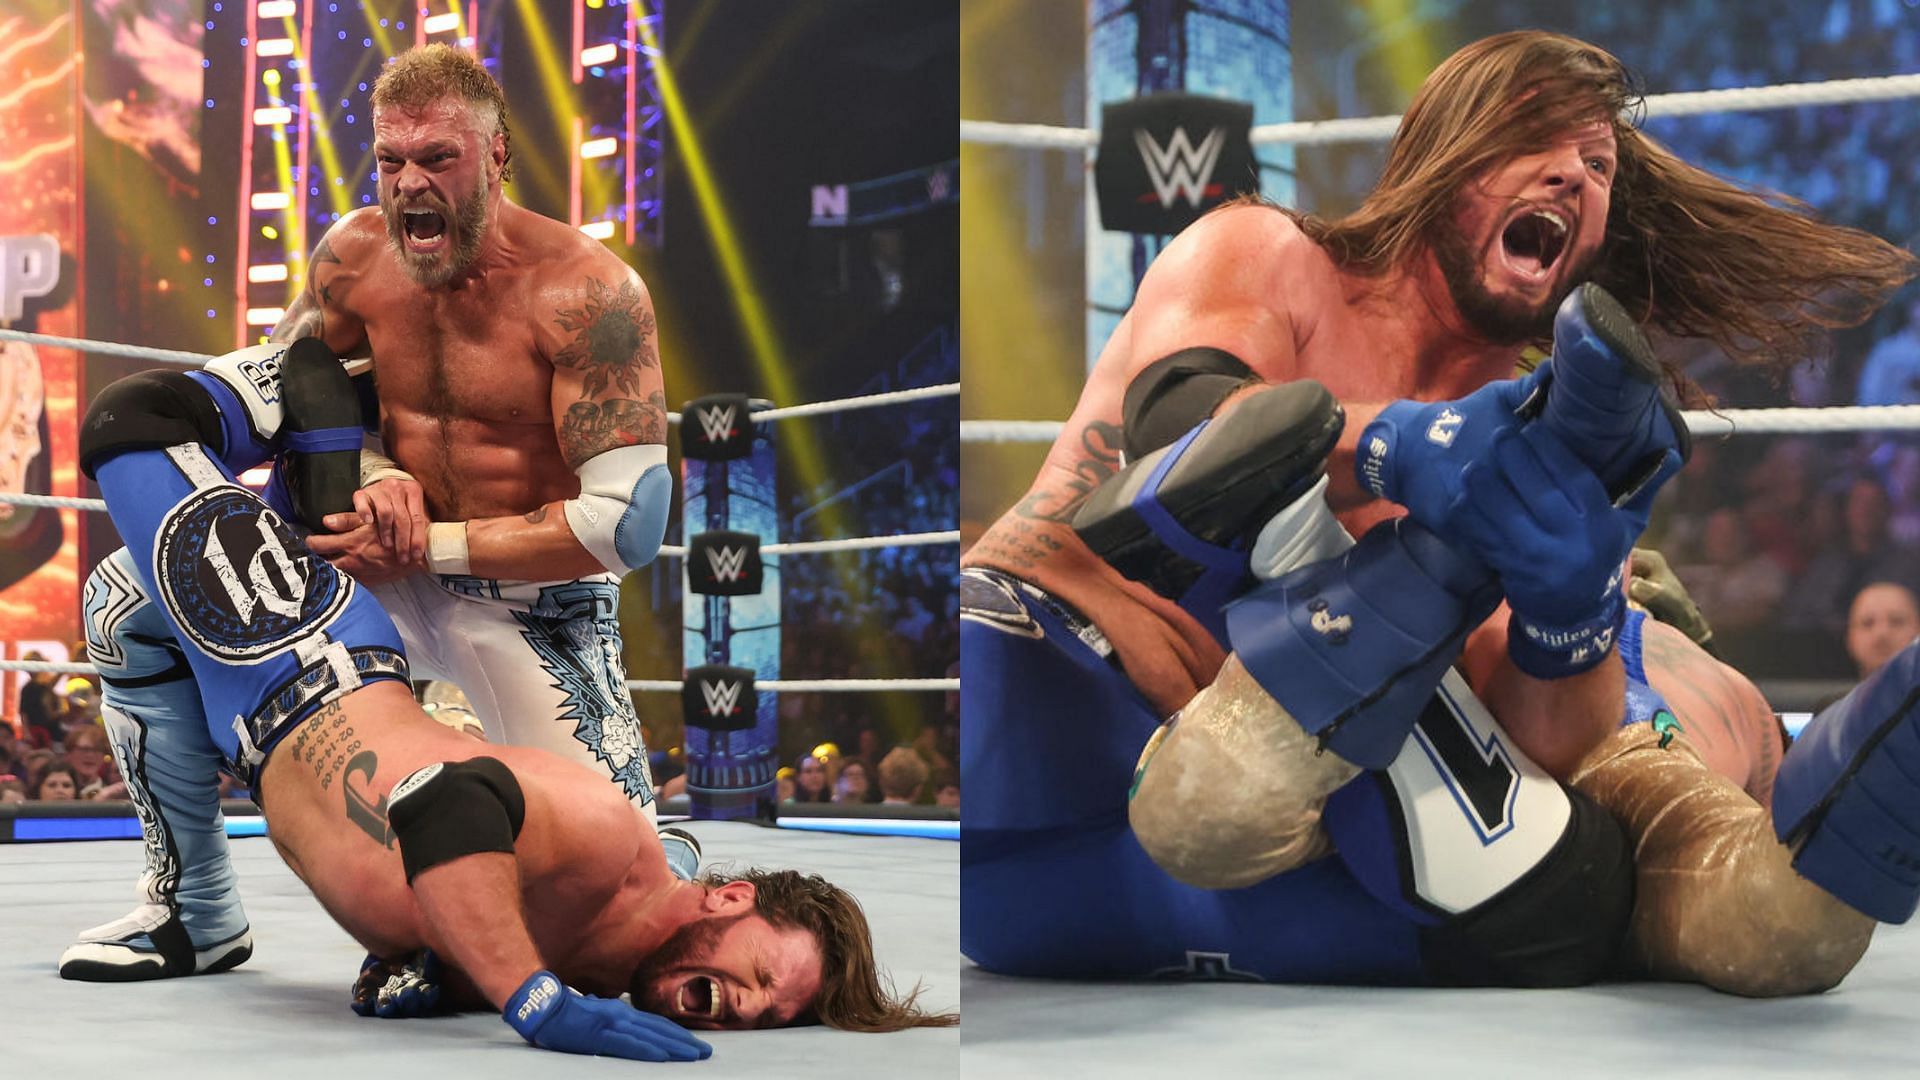 AJ Styles and Edge both gave it their all on SmackDown